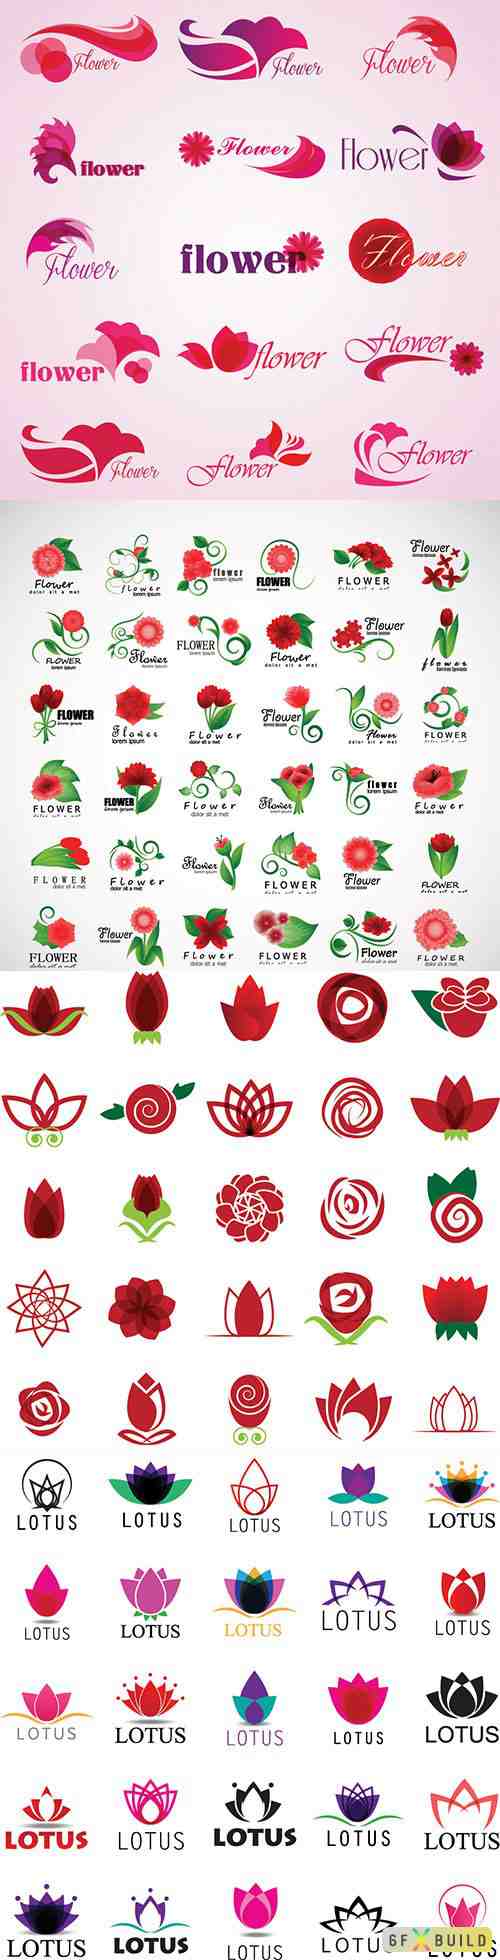 Flower icons vector set